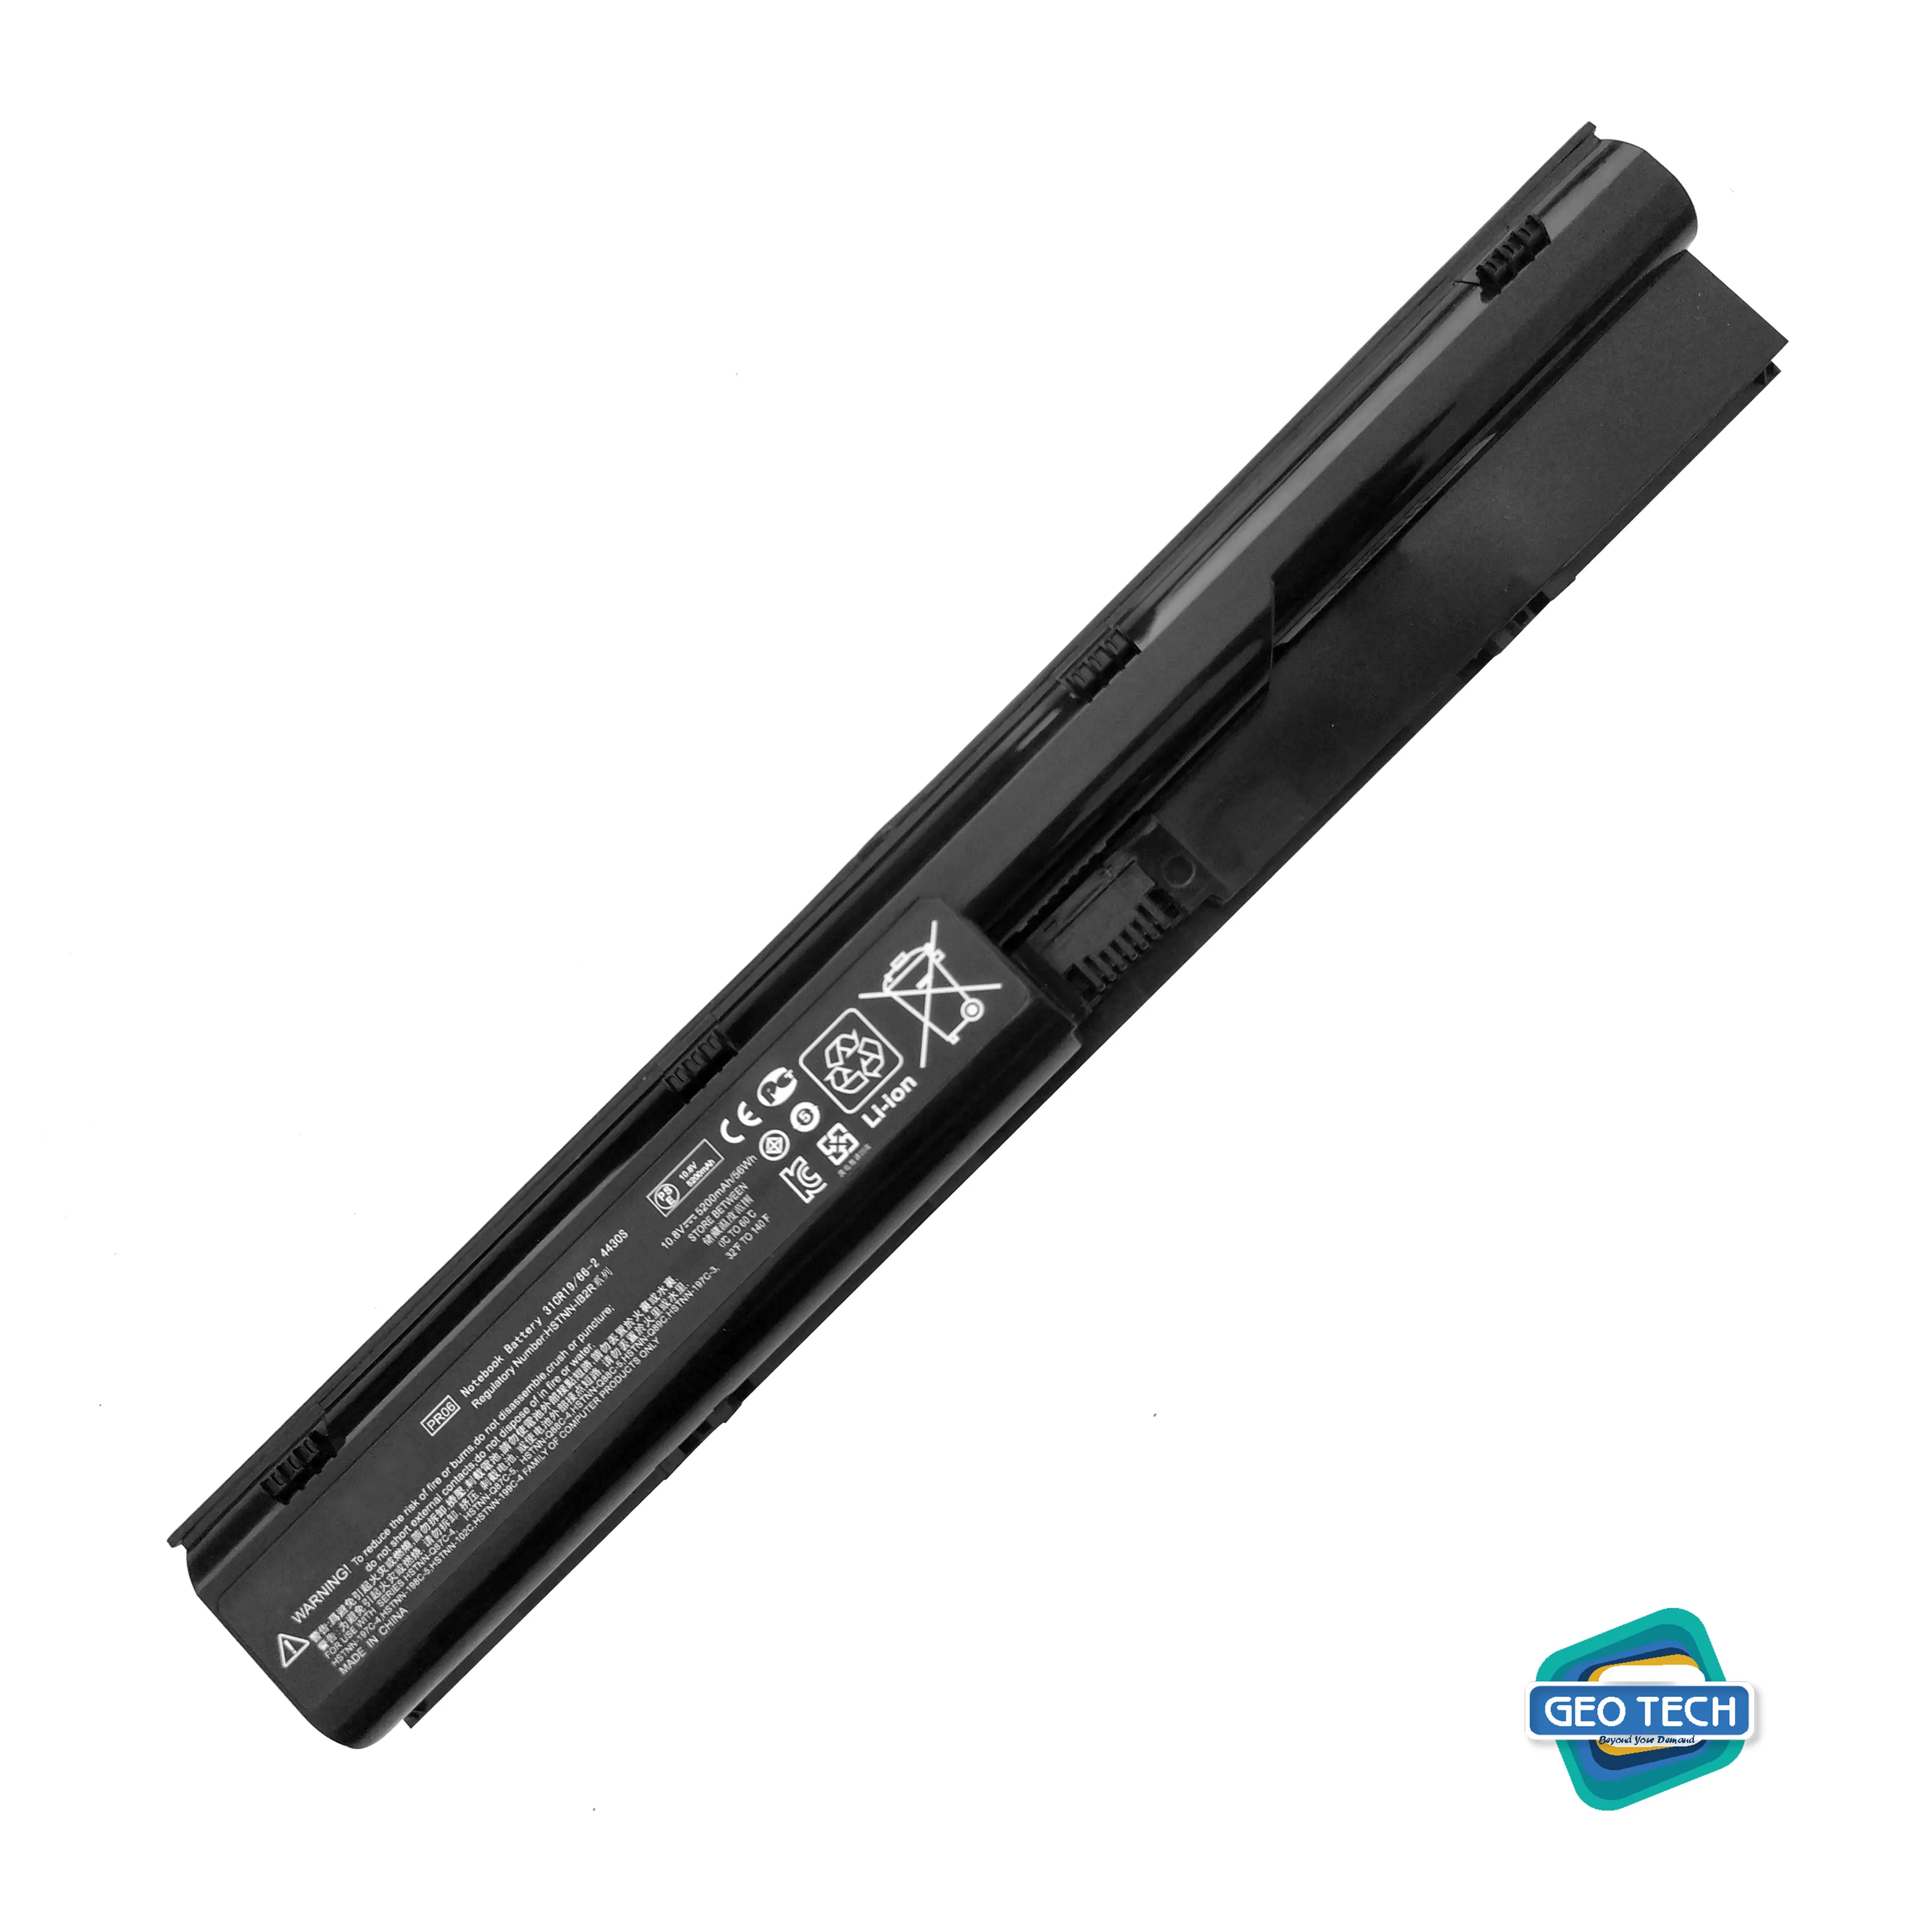 LAPTOP BATTERY FOR HP 4430/ 4530S/4331s/4435s/4436s/4530s.